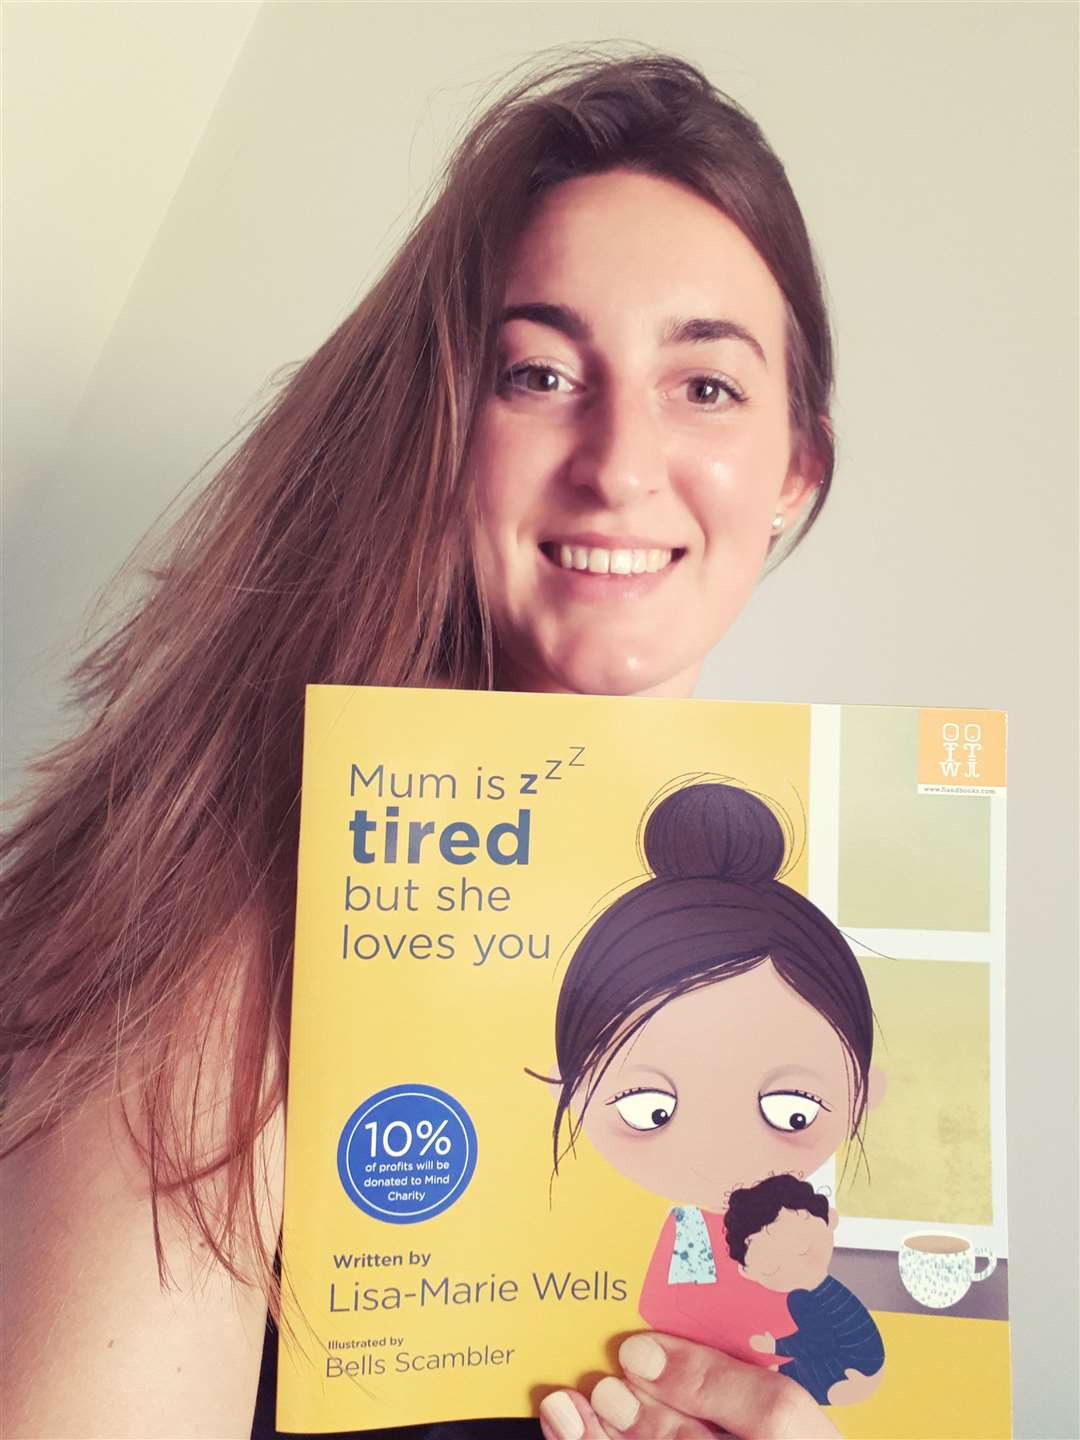 Lisa-Marie Wells with her book 'Mum is tired but she loves you' Picture: Lisa-Marie Wells